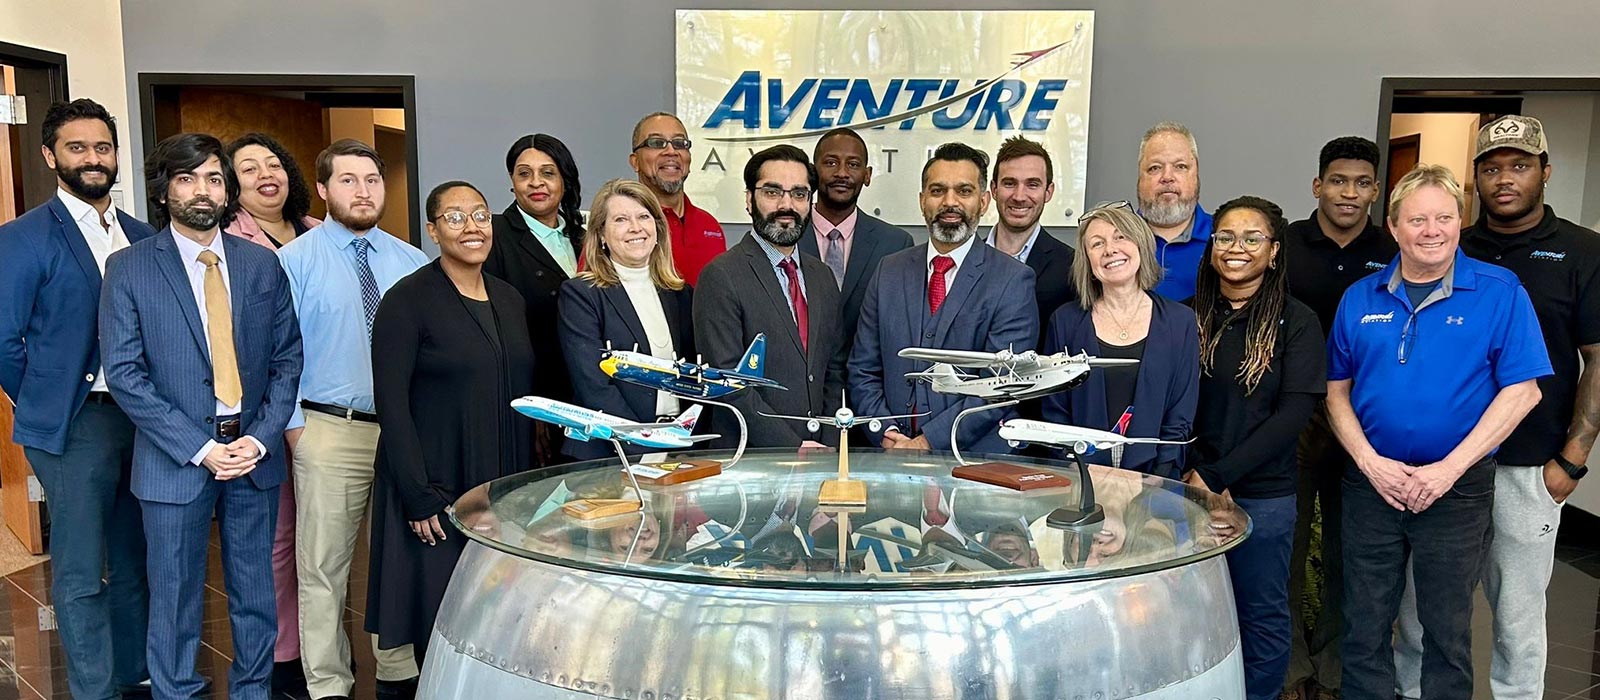 A group of 18 staff members, smiling and facing the camera, inside a building lobby with a sign saying Aventure Aviation, and a table with various model aircraft